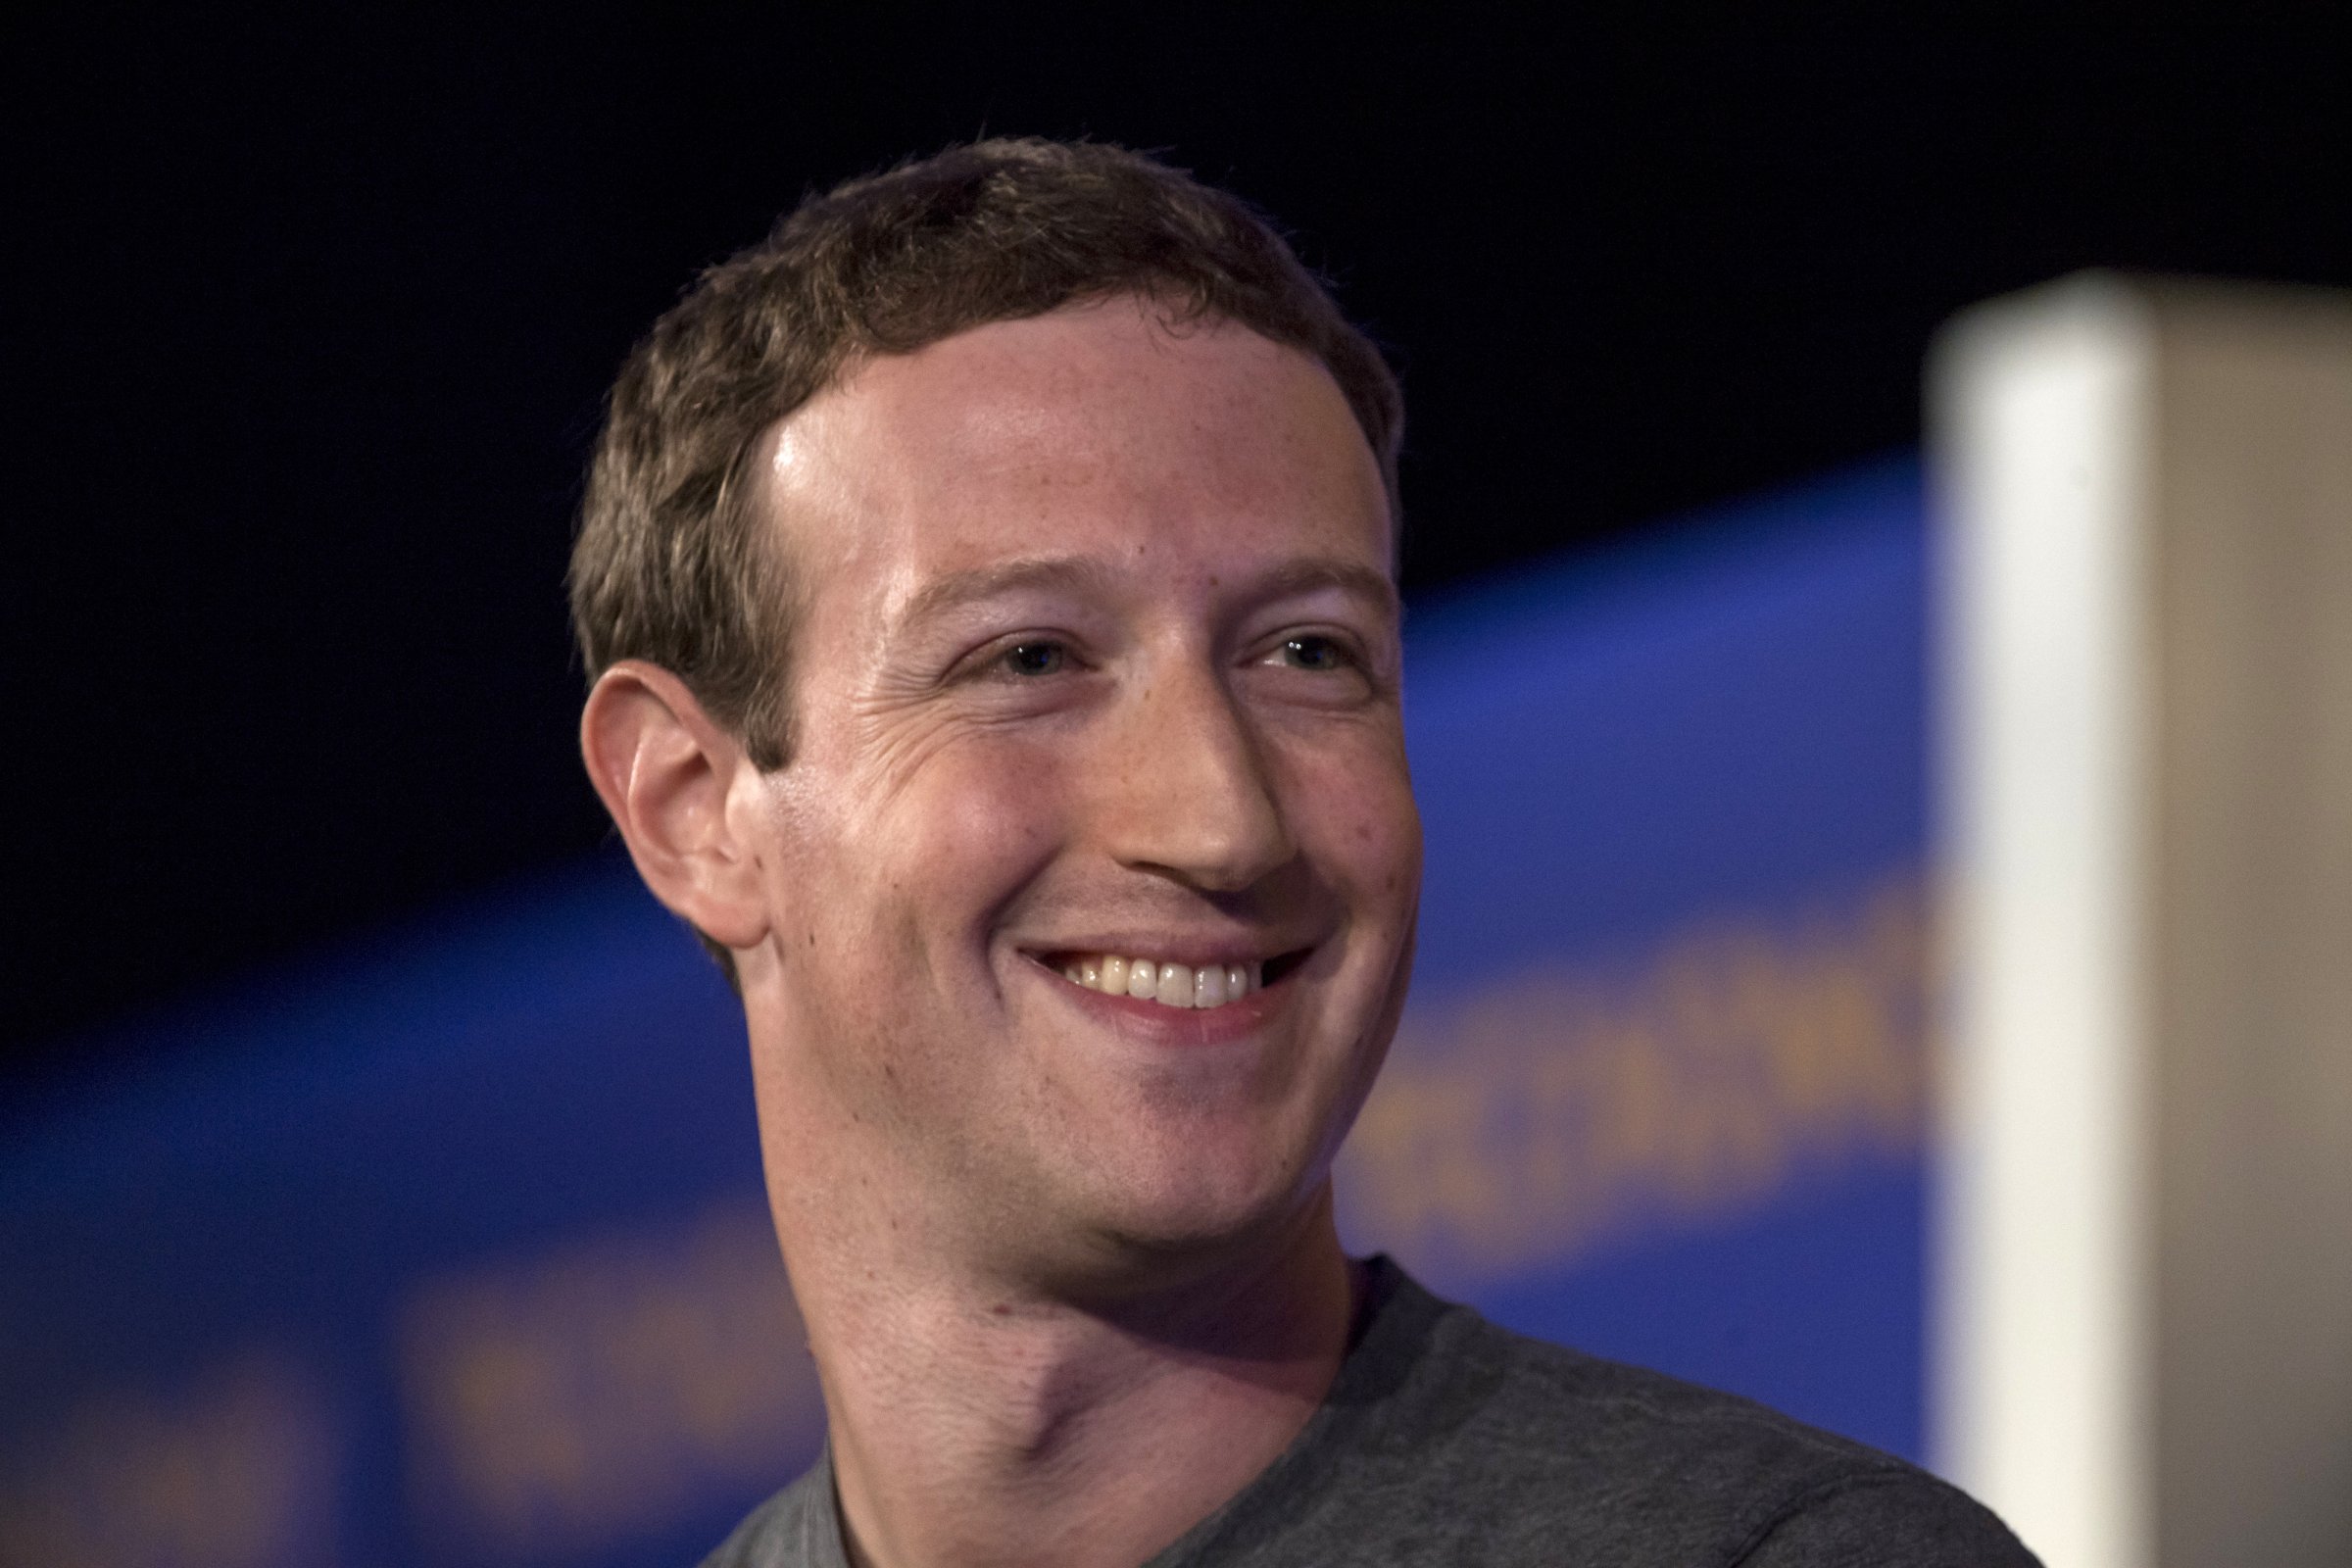 Mark Zuckerberg, chief executive officer and founder of Facebook Inc., reacts during a session at the Techonomy 2016 conference in Half Moon Bay, California, U.S., on Thursday, Nov. 10, 2016.